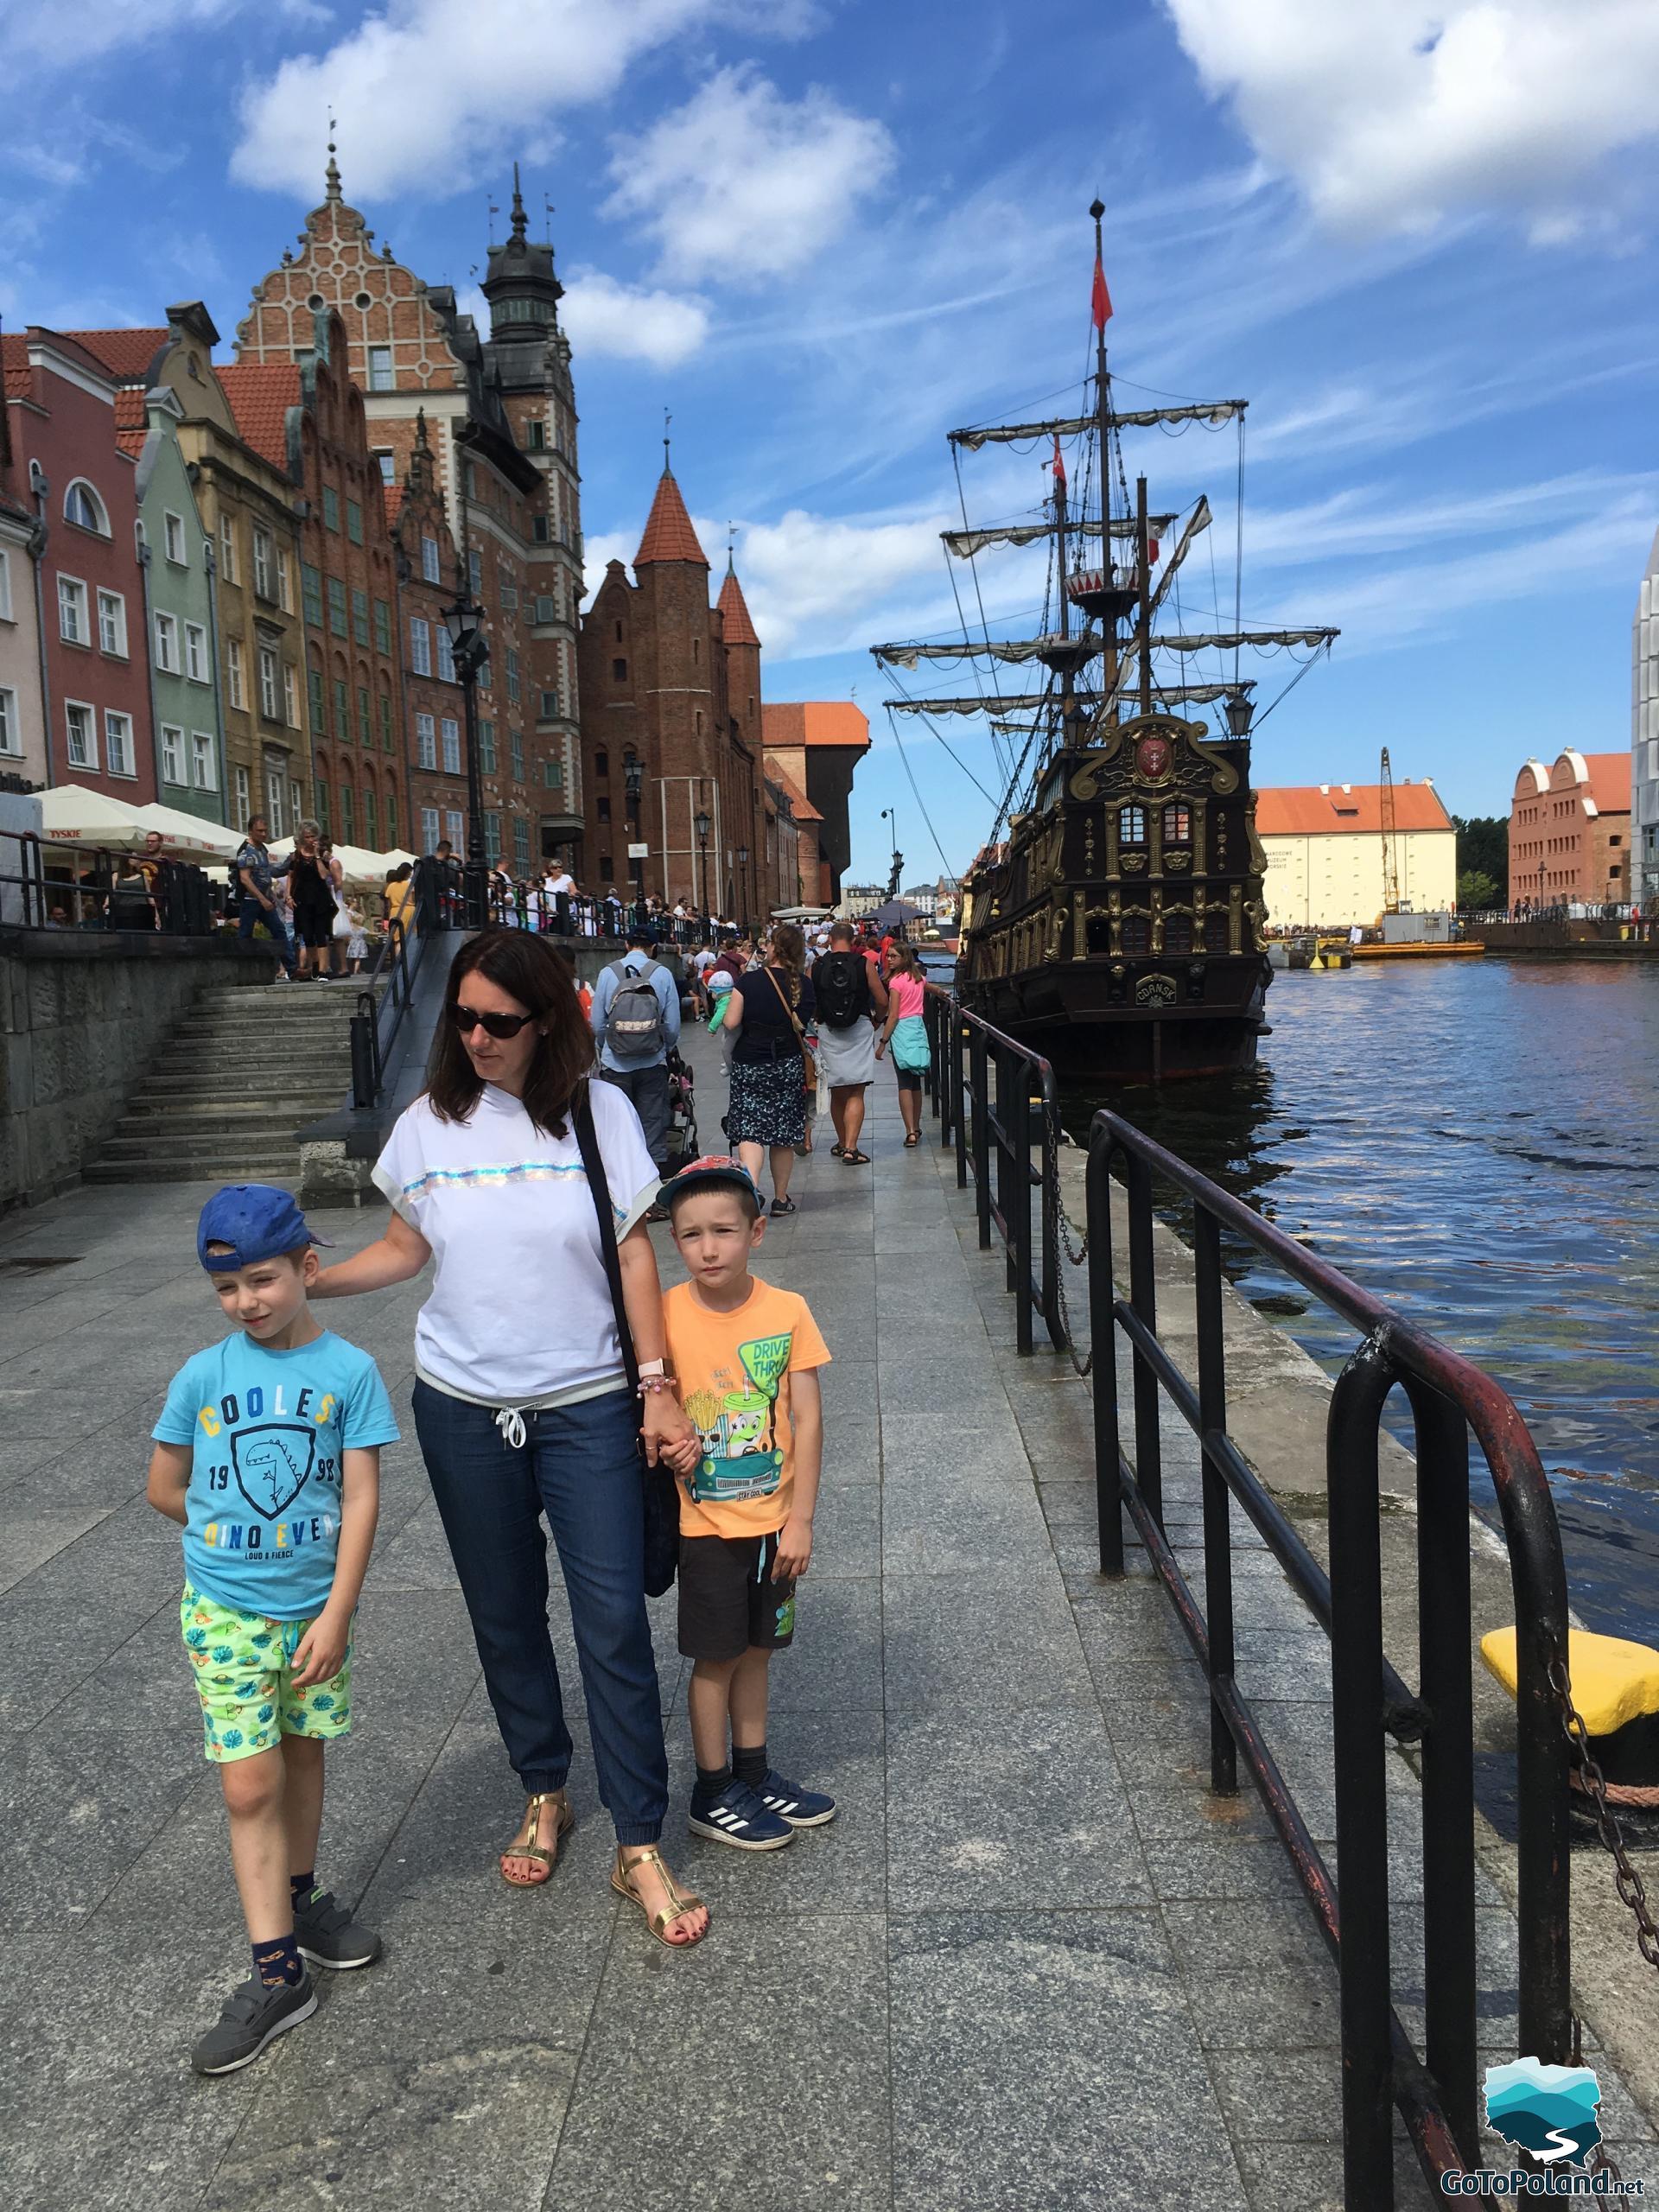 a woman and two children are standing by the wharf, an old crane can be seen in the background, a historic ship is standing on the river